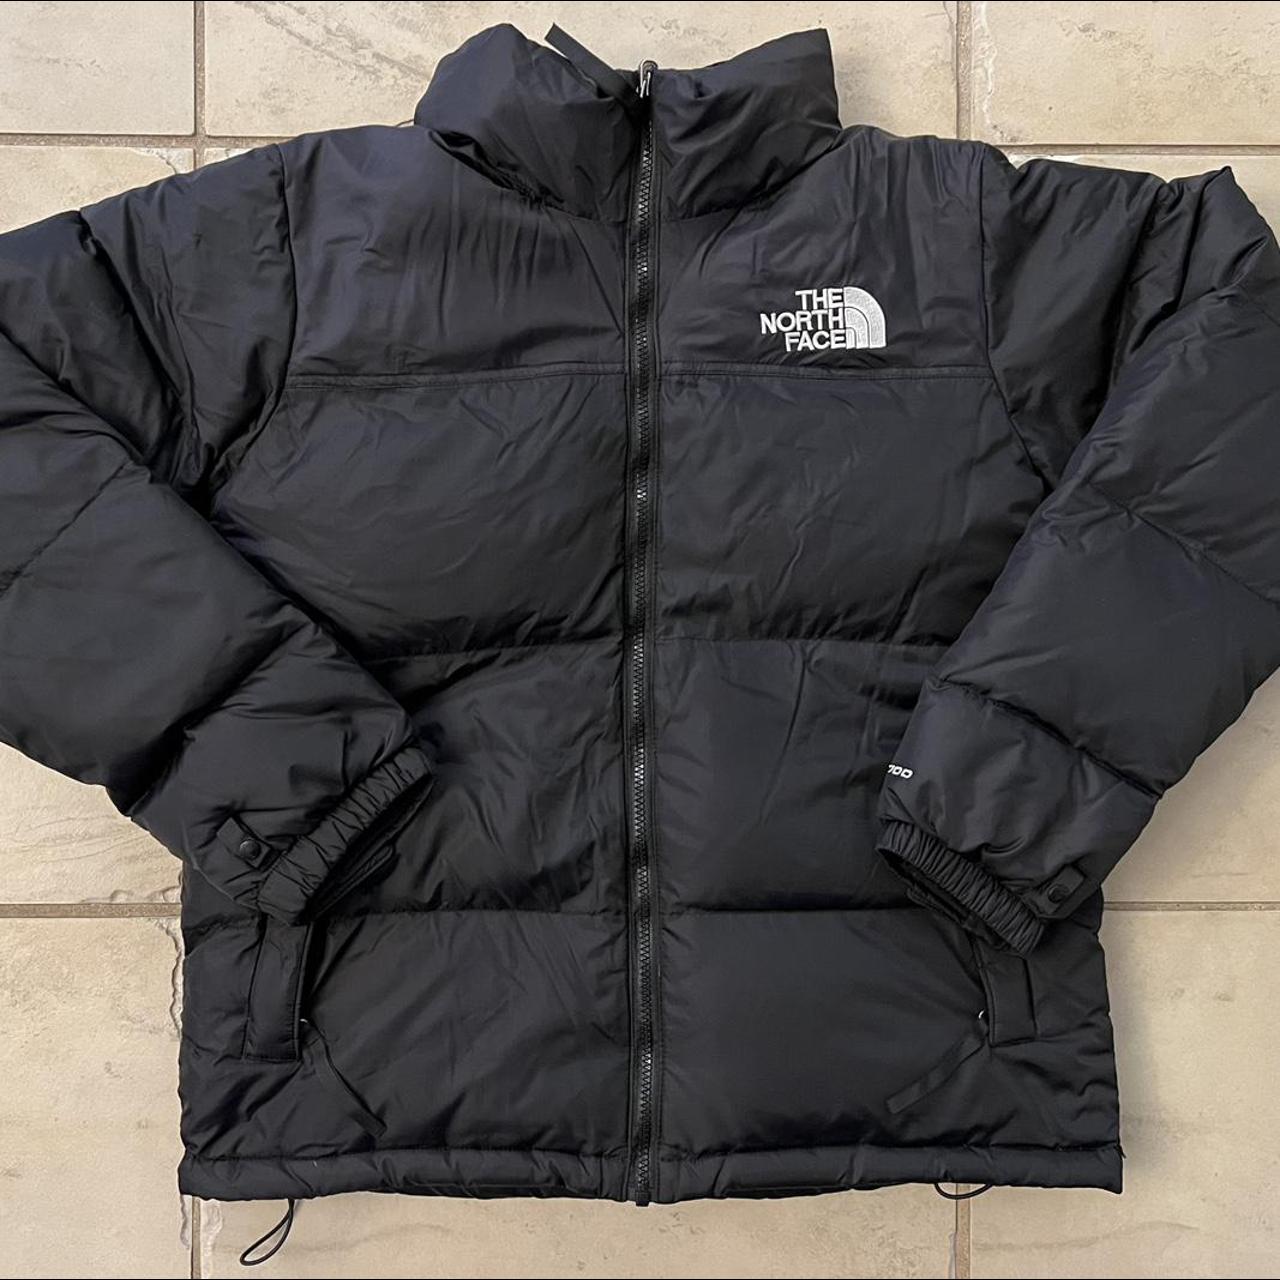 The North Face Men's Jacket (2)